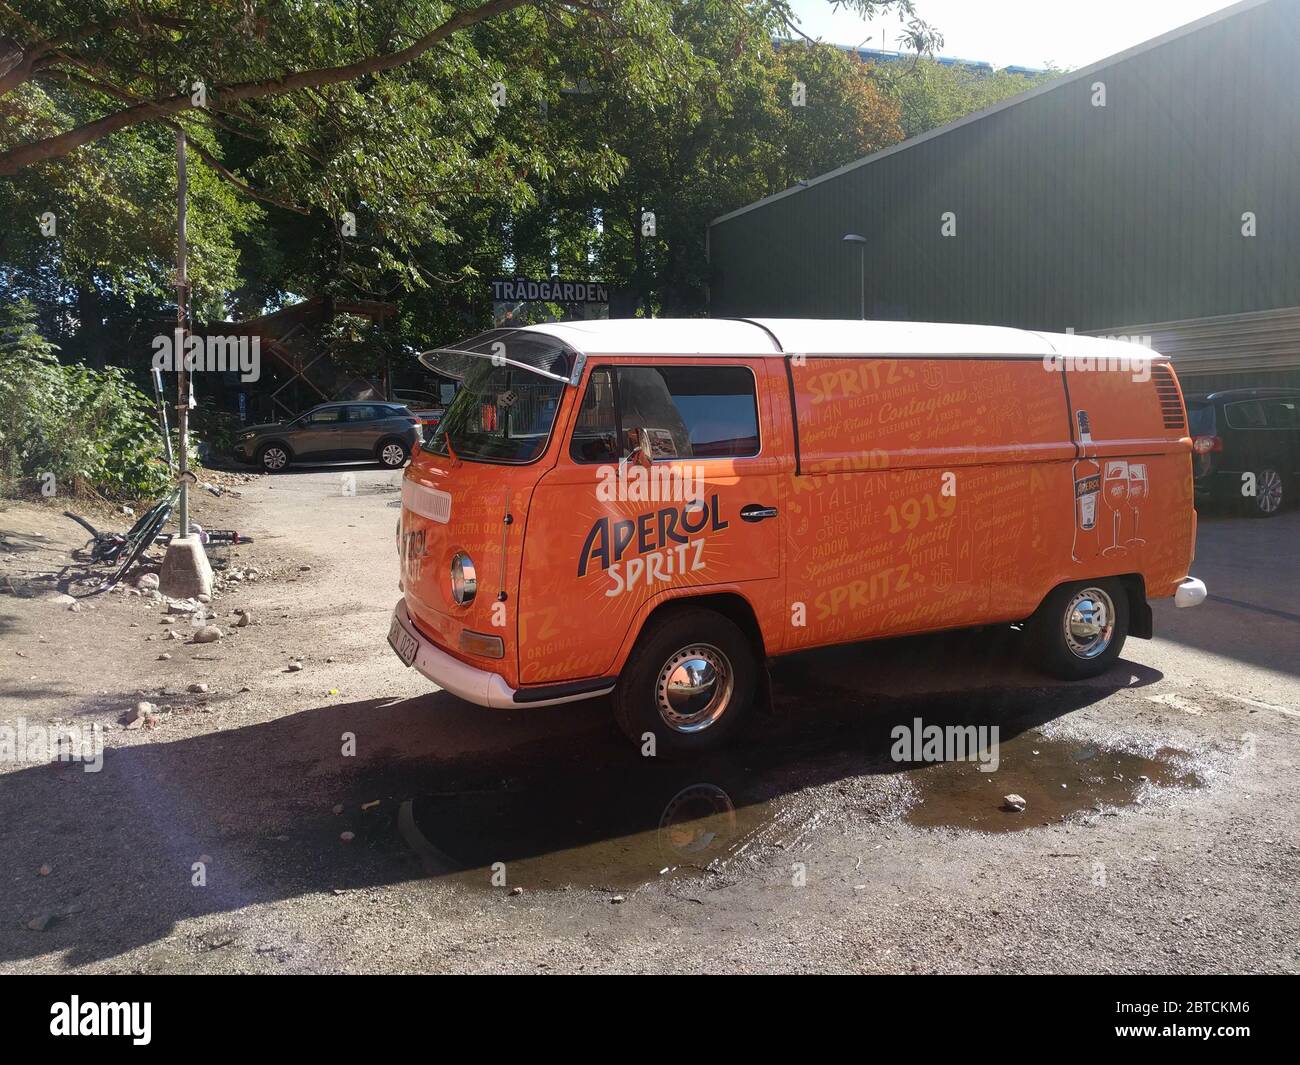 Sweden, Stockholm - September 02 2018: the view of T2 Van truck used as  Aperol Spritz pop up bar on the city street on September 02 2018 in  Stockholm Stock Photo - Alamy